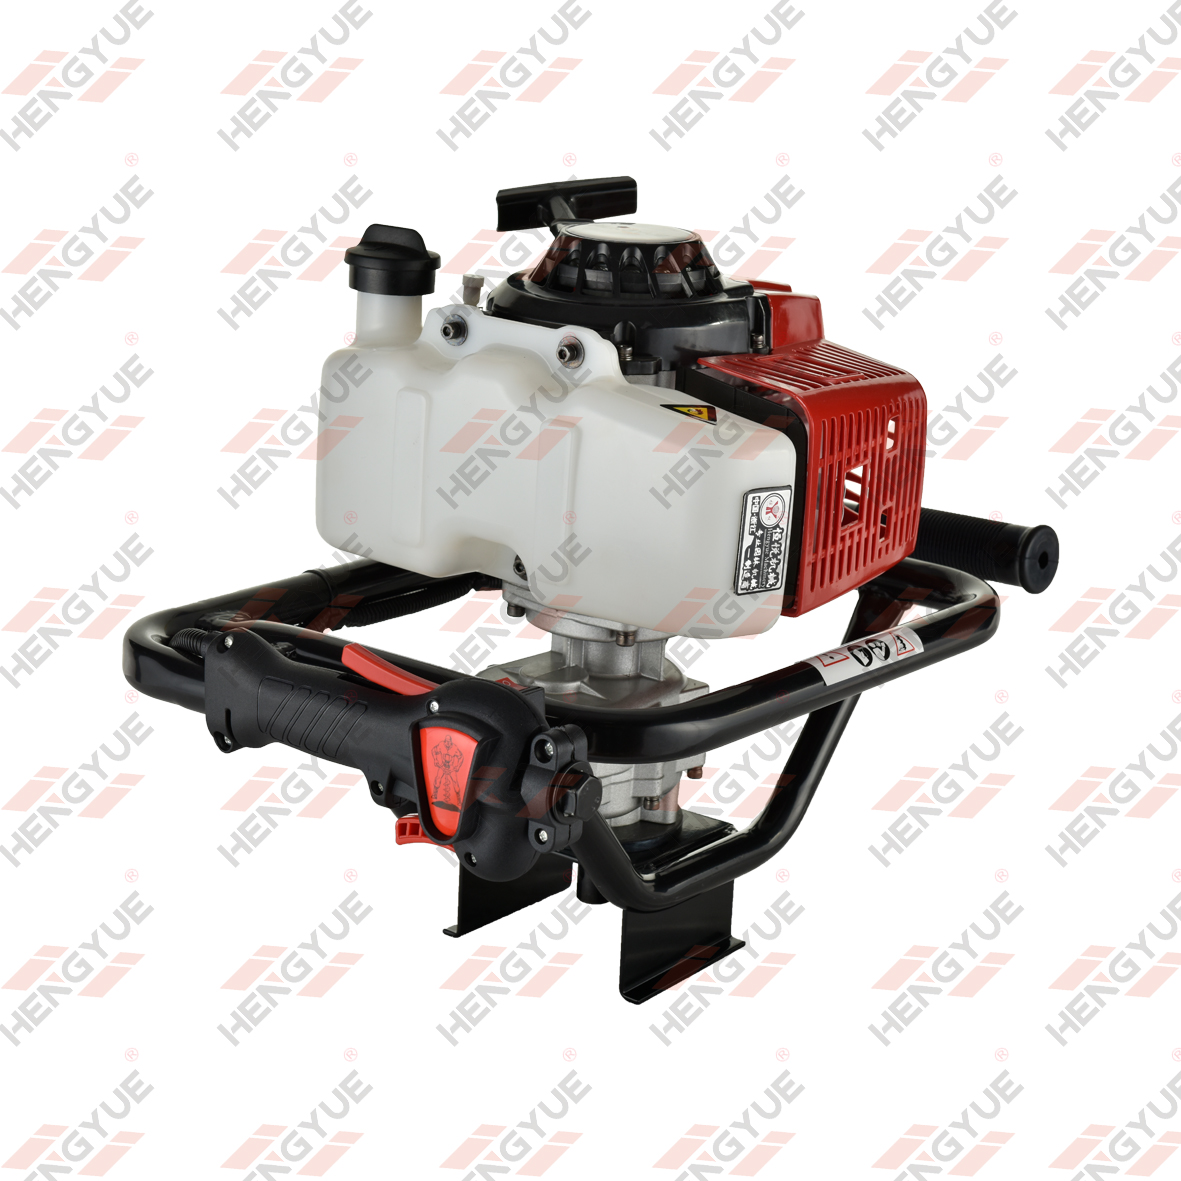 68CC Hand Held Earth Auger Machine 